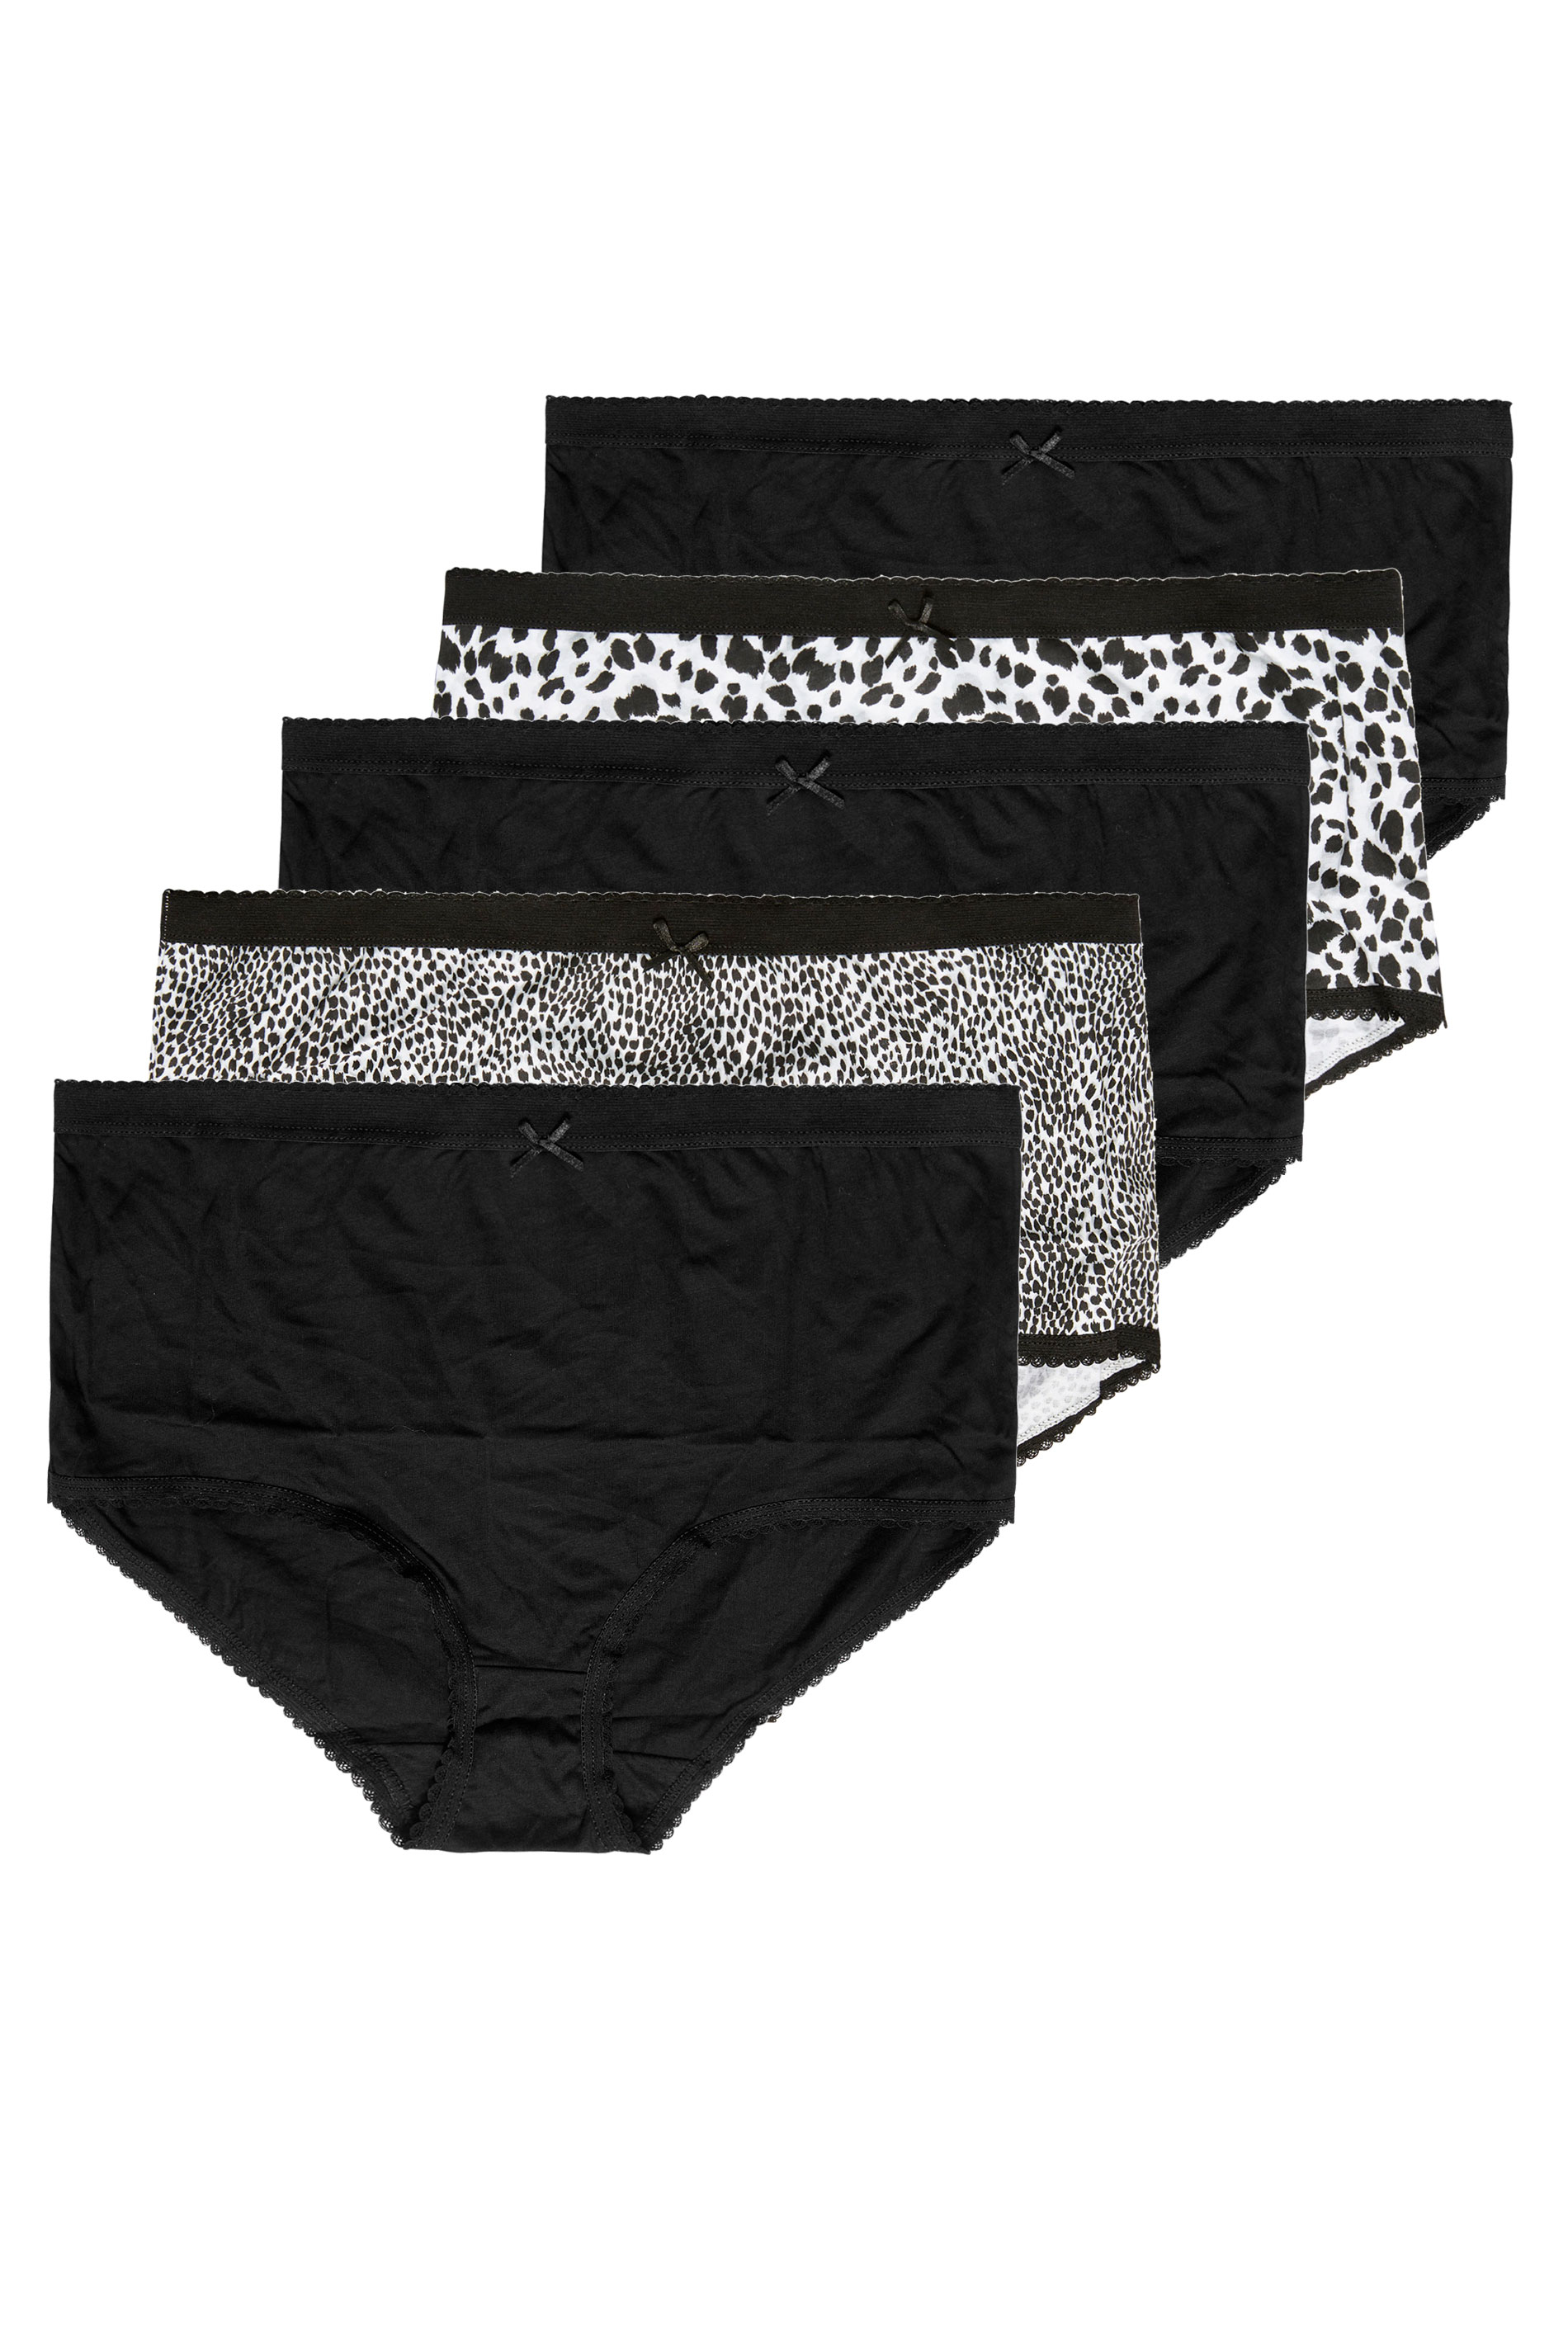 5 PACK Black & White Leopard Print Full Briefs | Yours Clothing